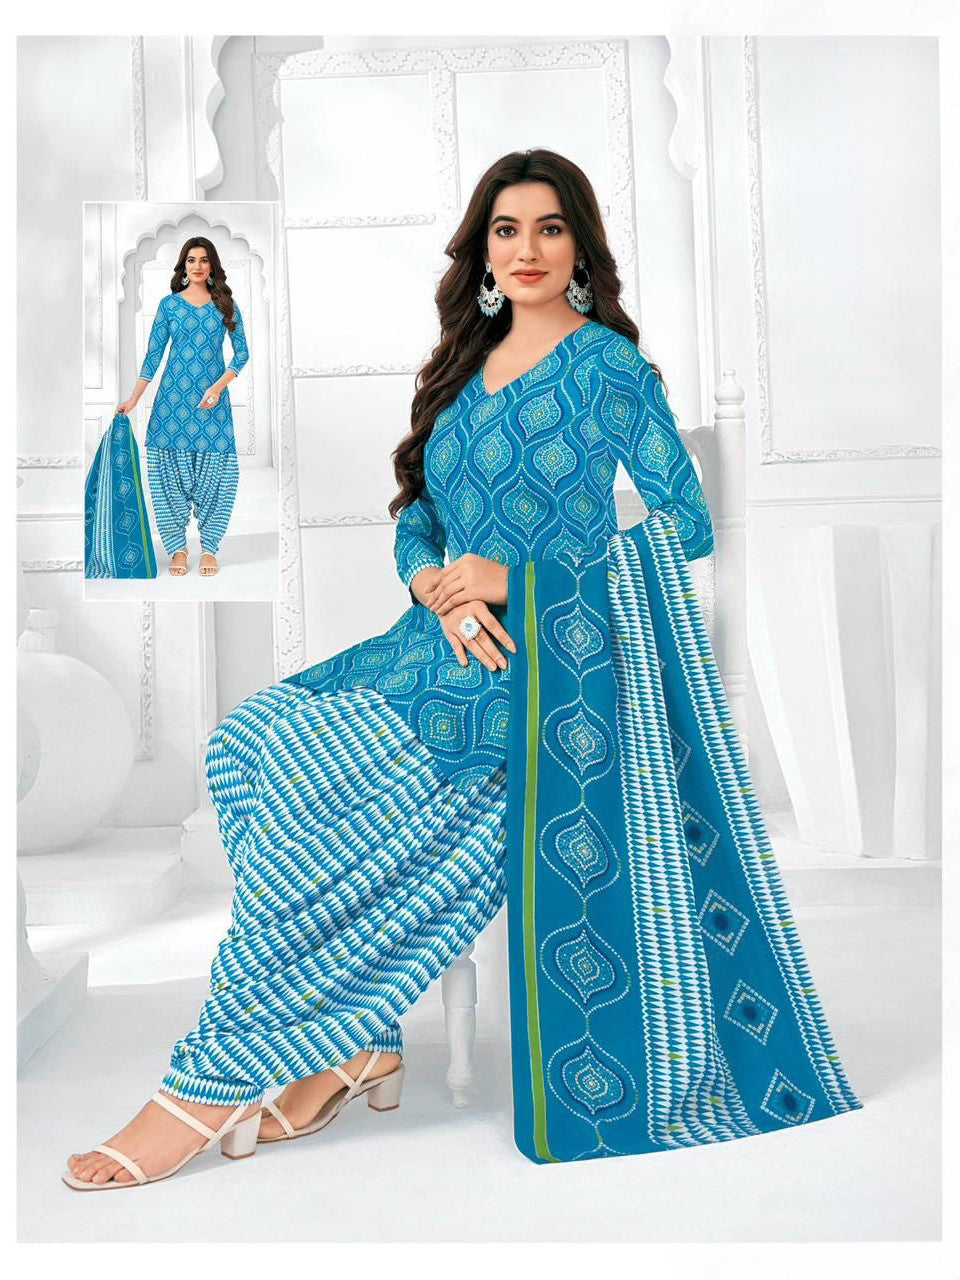 Roop Darshan  Online Shopping for the Latest Ethnic Clothes & Fashion